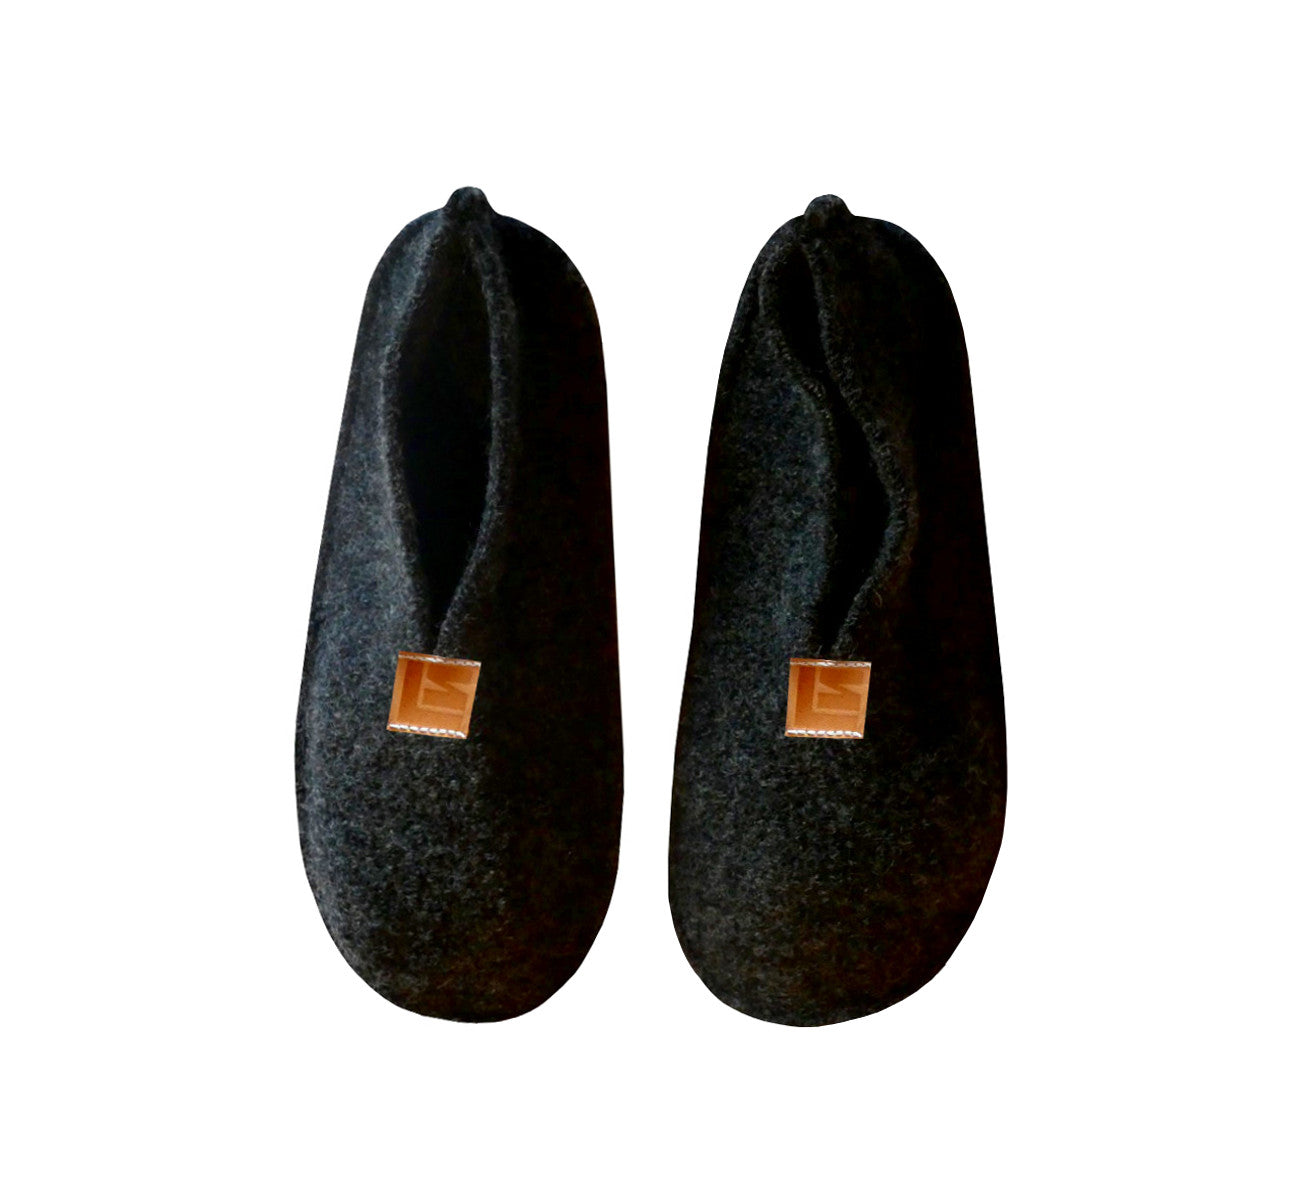 Warm, comfortable and cozy black slippers, home shoes handmade of felted wool, Nordic reindeer leather sole.